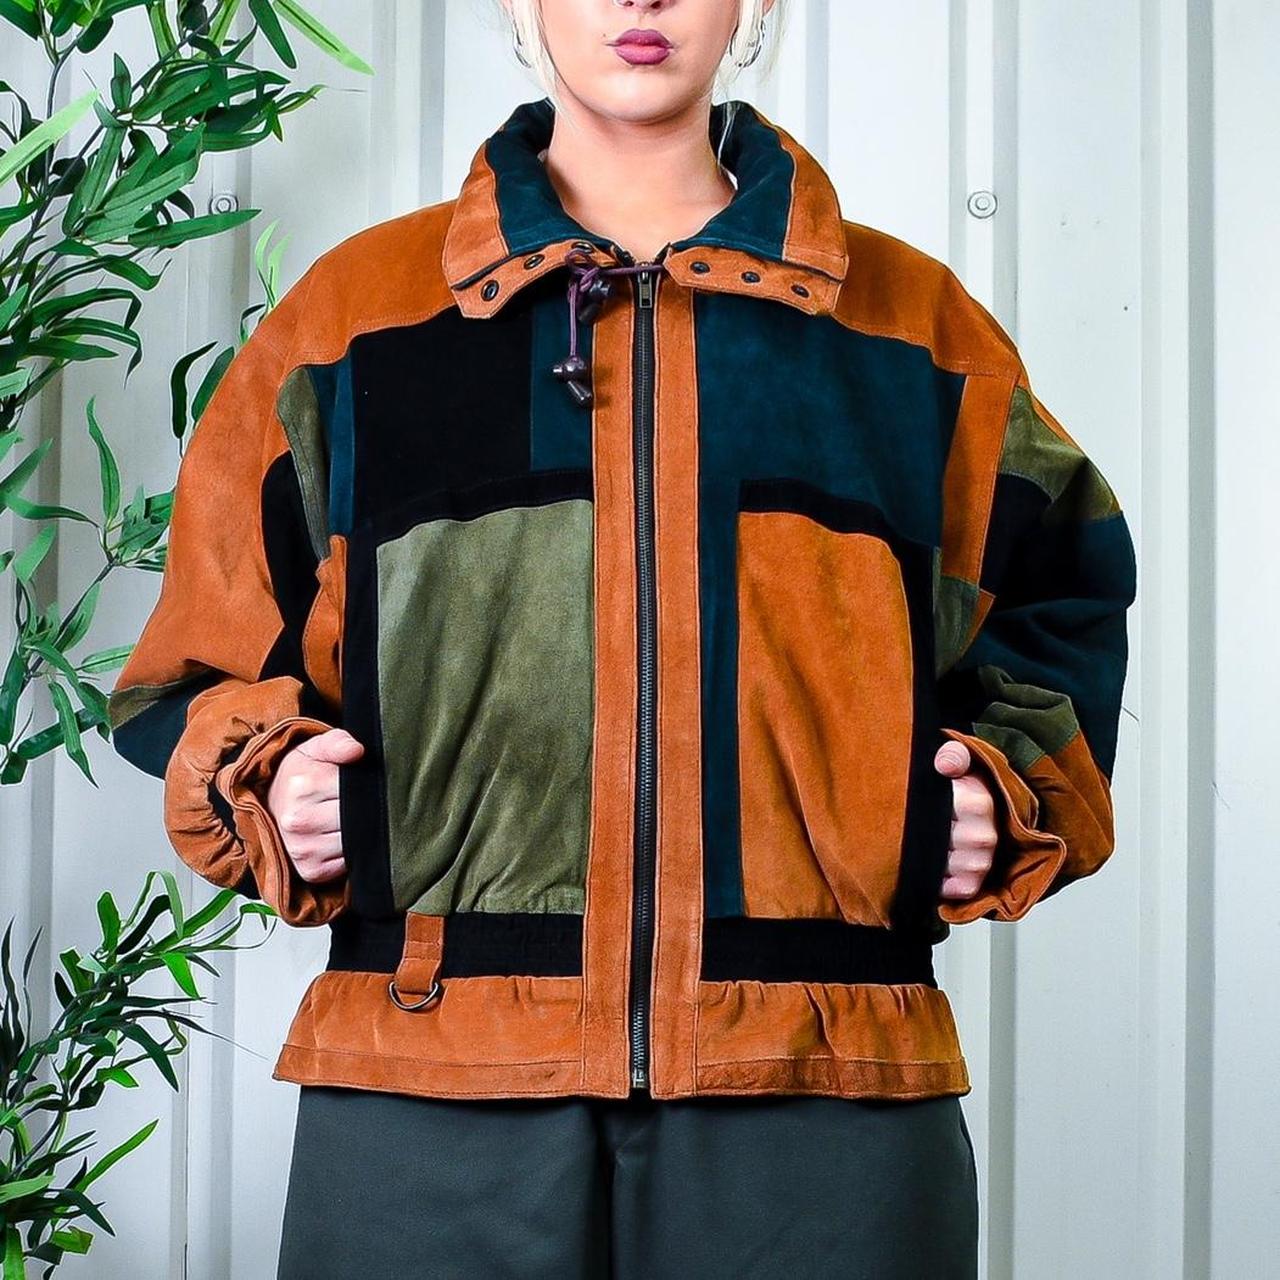 Sears 90s Patchwork Leather Jacket 35％OFF - ジャケット・アウター